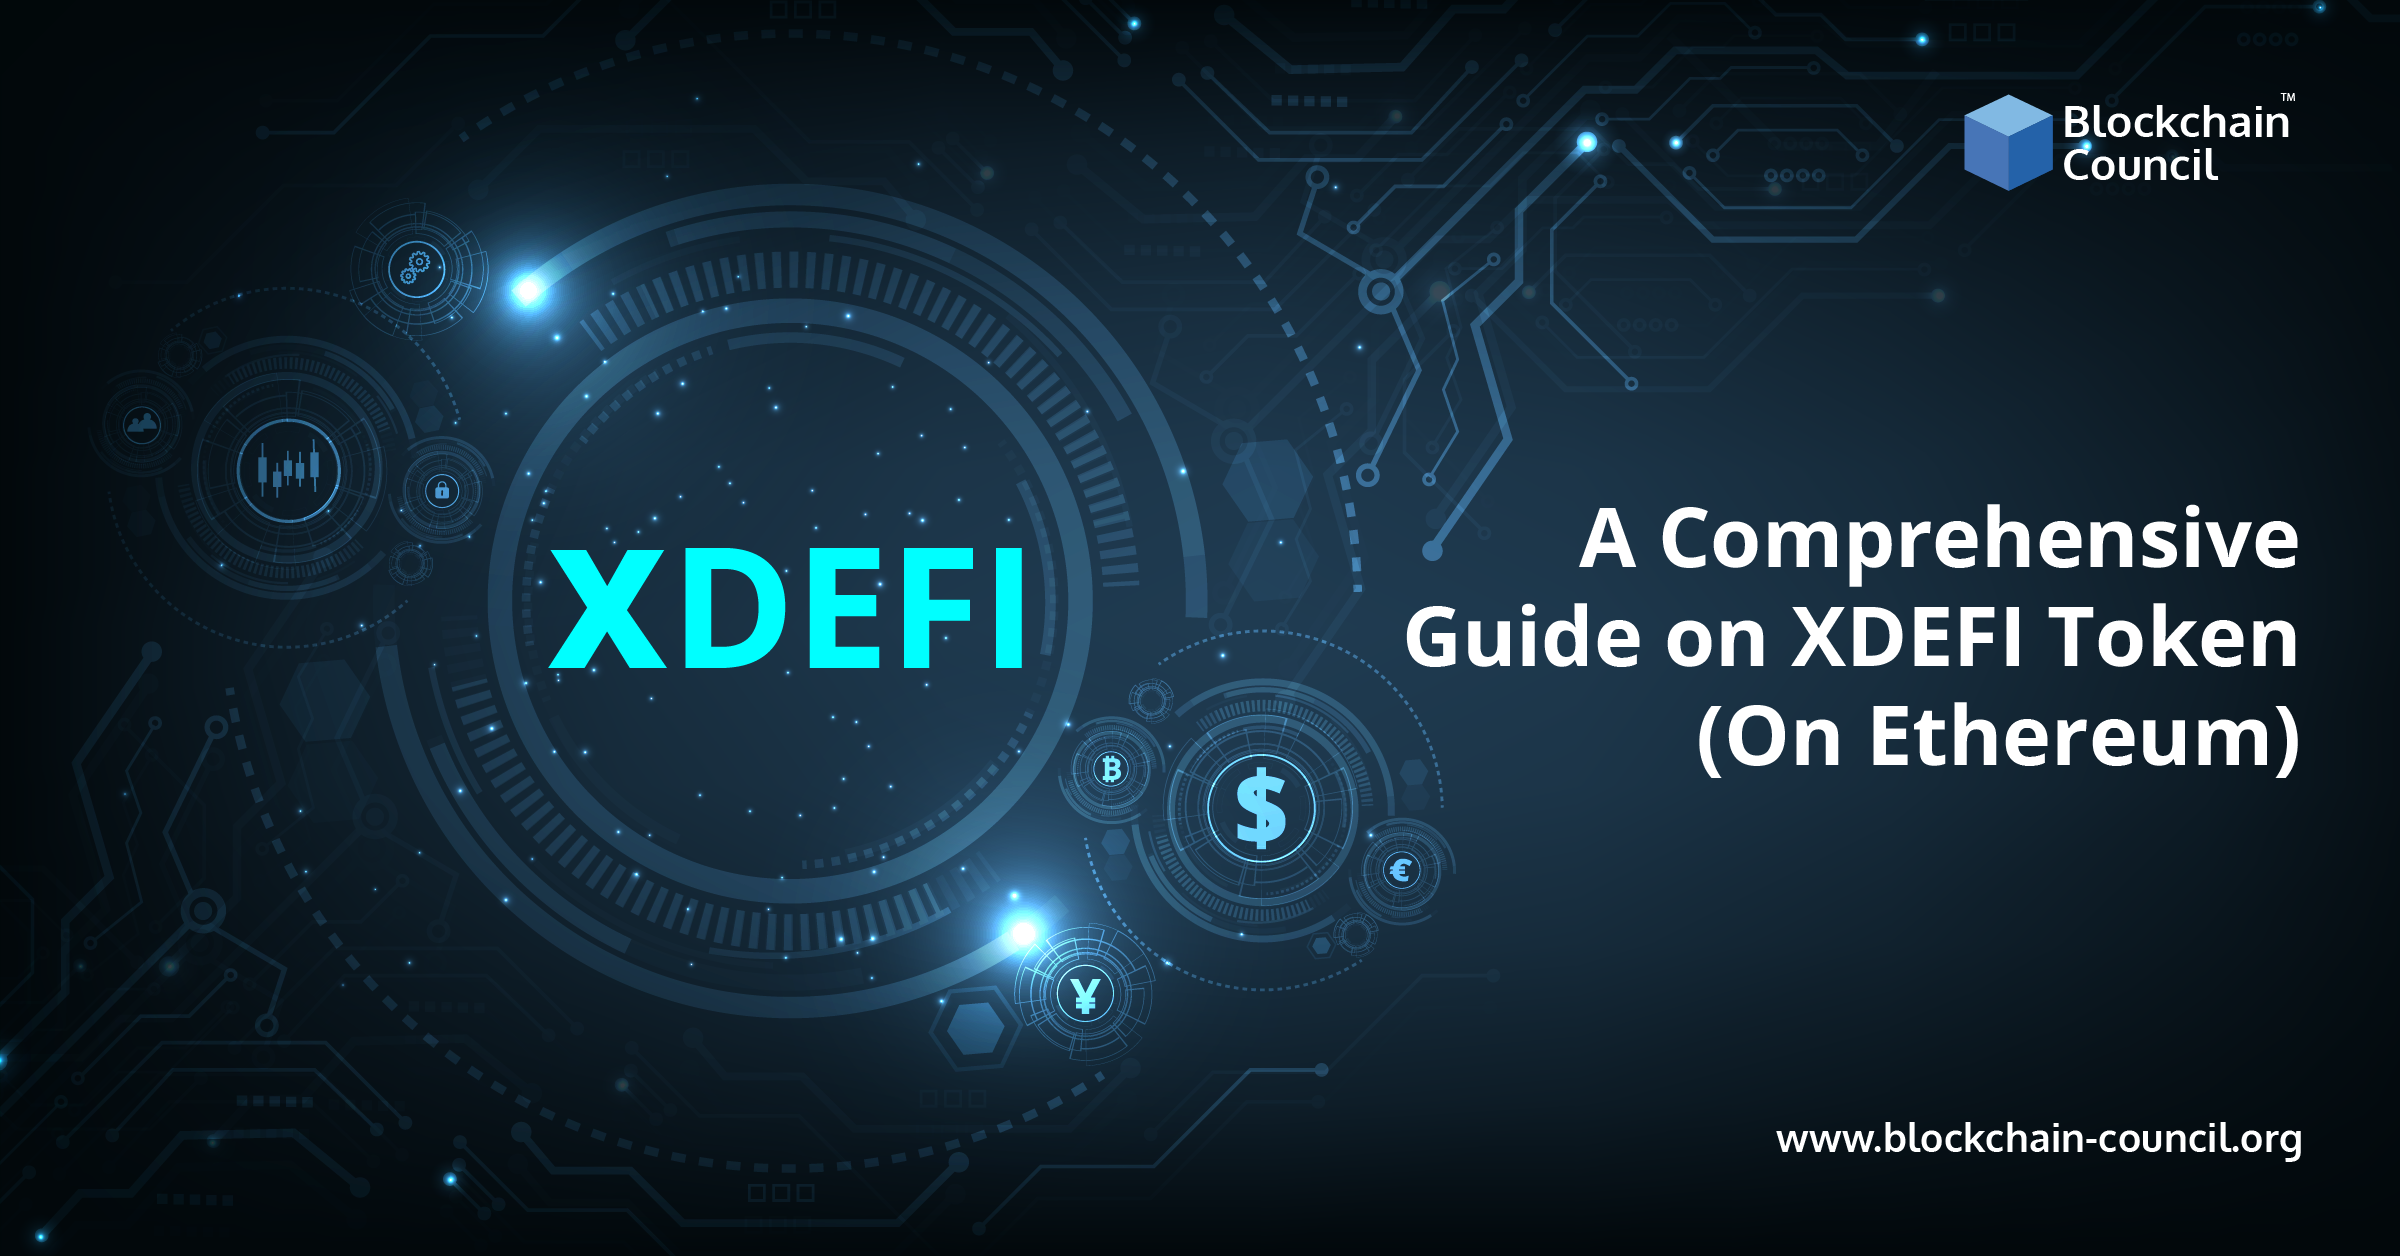 A Comprehensive Guide on XDEFI Token (On Ethereum)